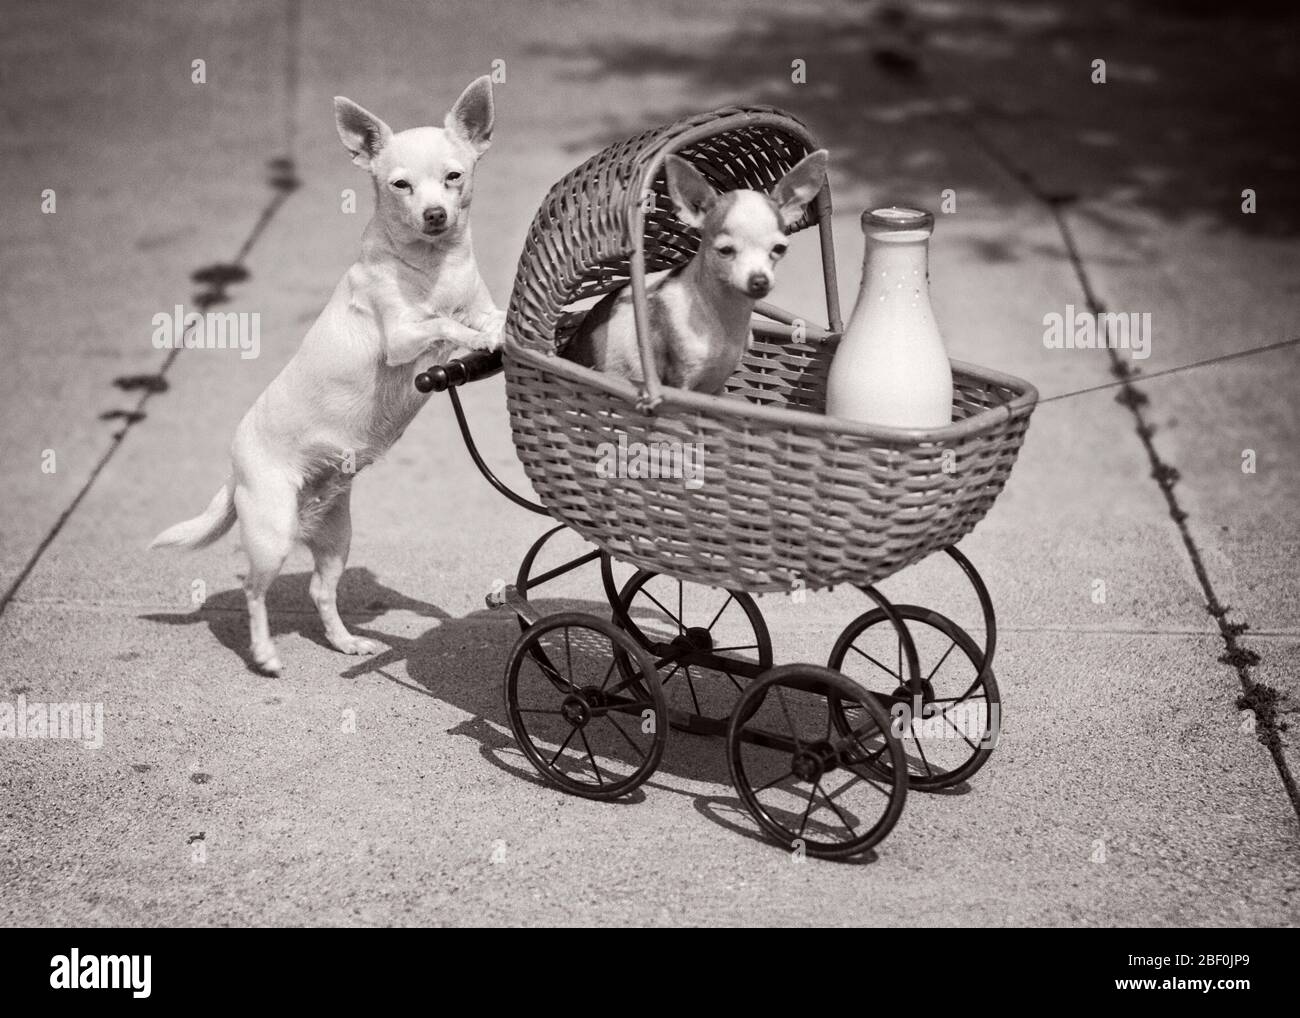 1930s DOG LOOKING AT CAMERA PUSHING ANOTHER DOG IN WICKER BABY BUGGY WITH BOTTLE OF MILK HUMOROUS - asp jo4090 ASP001 HARS GROTESQUE CANINES ZANY COMICAL UNCONVENTIONAL POOCH CONNECTION CONCEPTUAL COMEDY WACKY IDIOSYNCRATIC AMUSING ANOTHER CANINE ECCENTRIC JUVENILES MAMMAL BABY CARRIAGE BLACK AND WHITE ERRATIC OLD FASHIONED OUTRAGEOUS Stock Photo